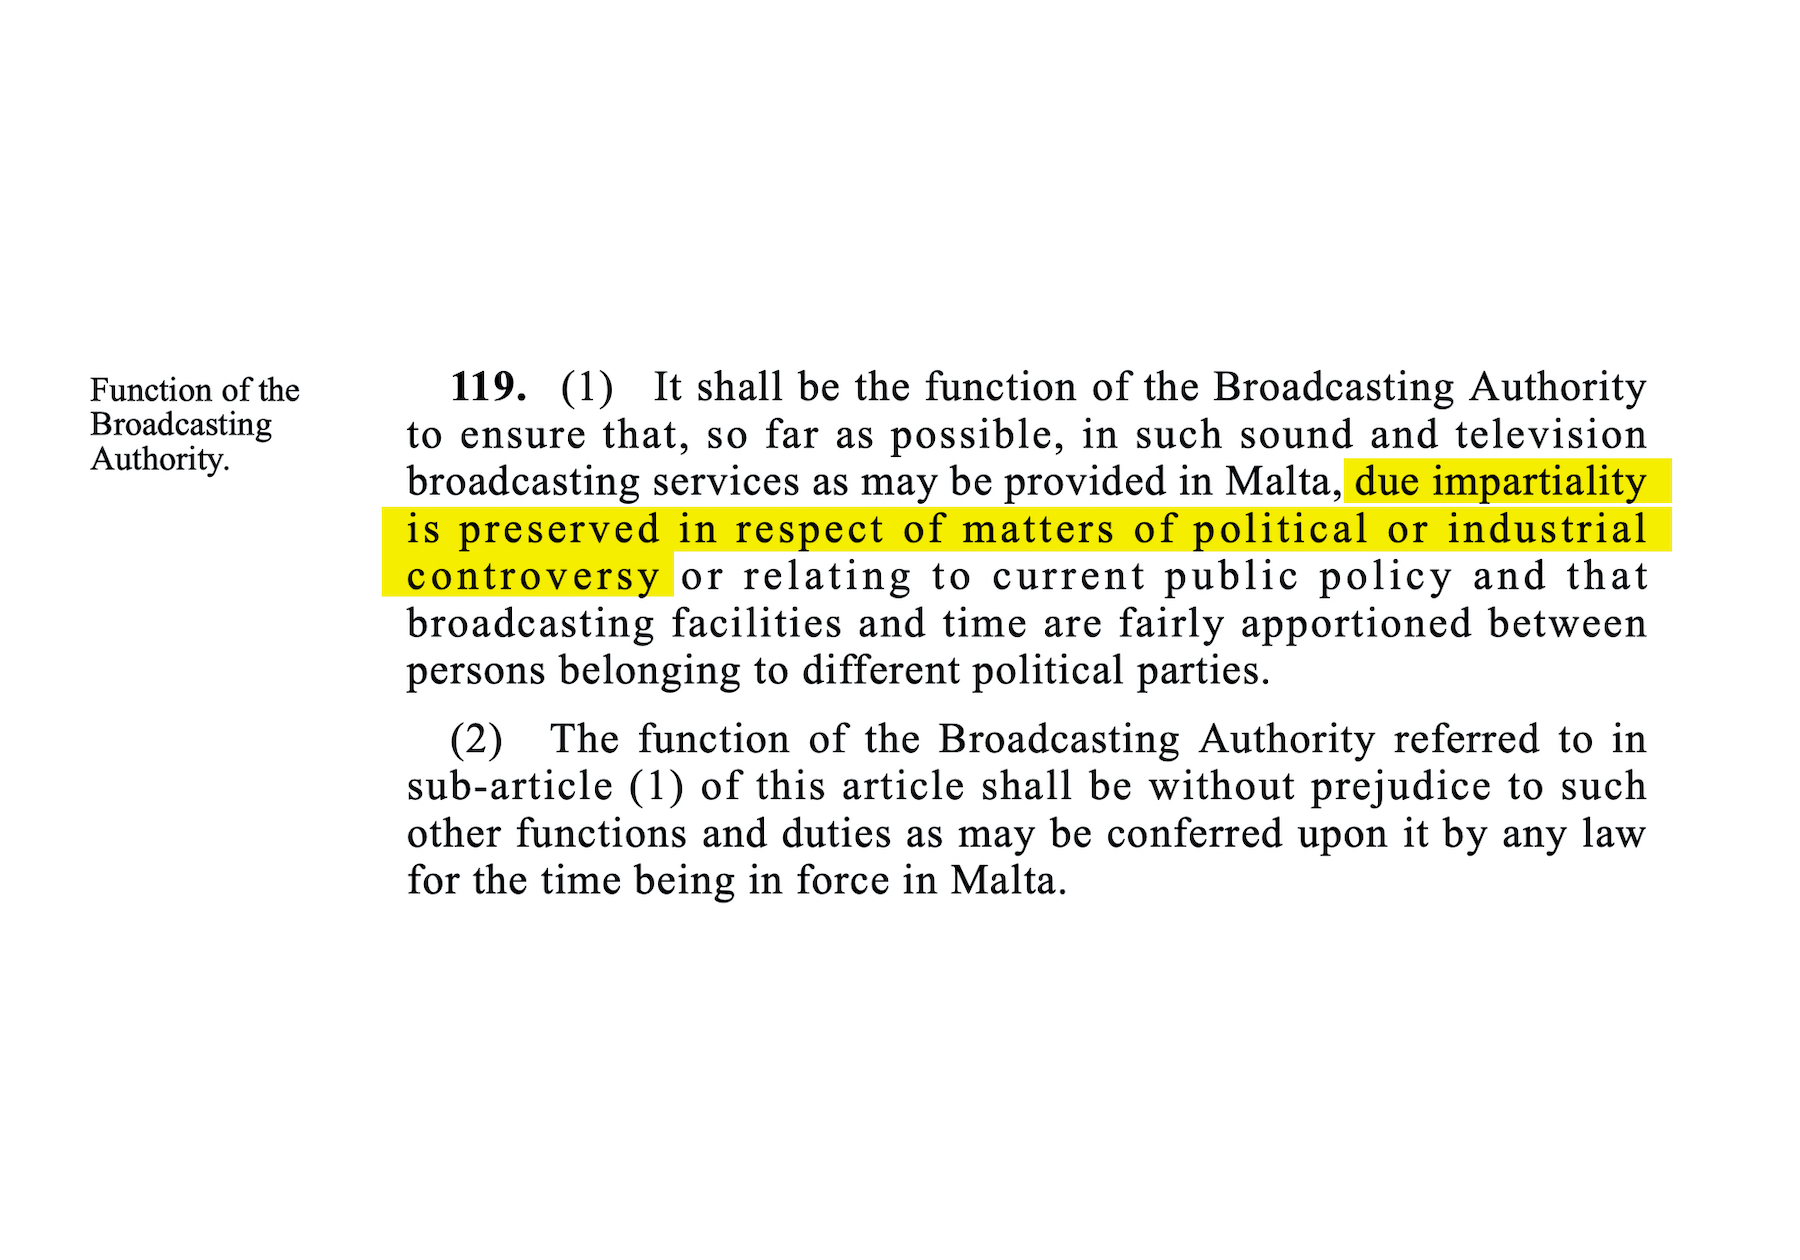 Extract from Article 119 of the Constitution of Malta on impartiality in broadcasting services